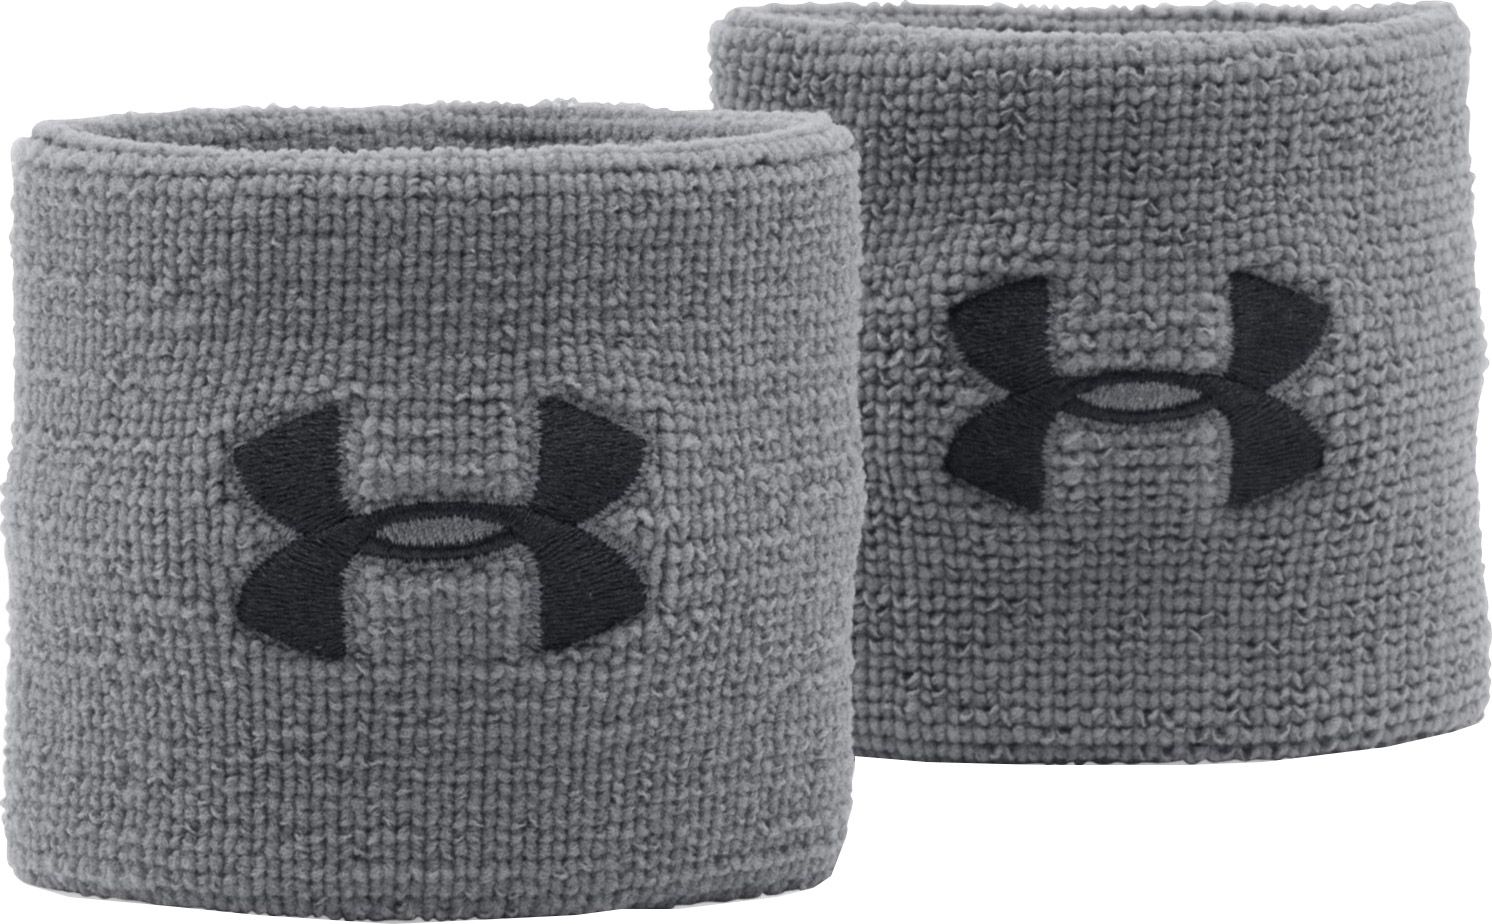 Under Armour Performance Wristbands - 3 